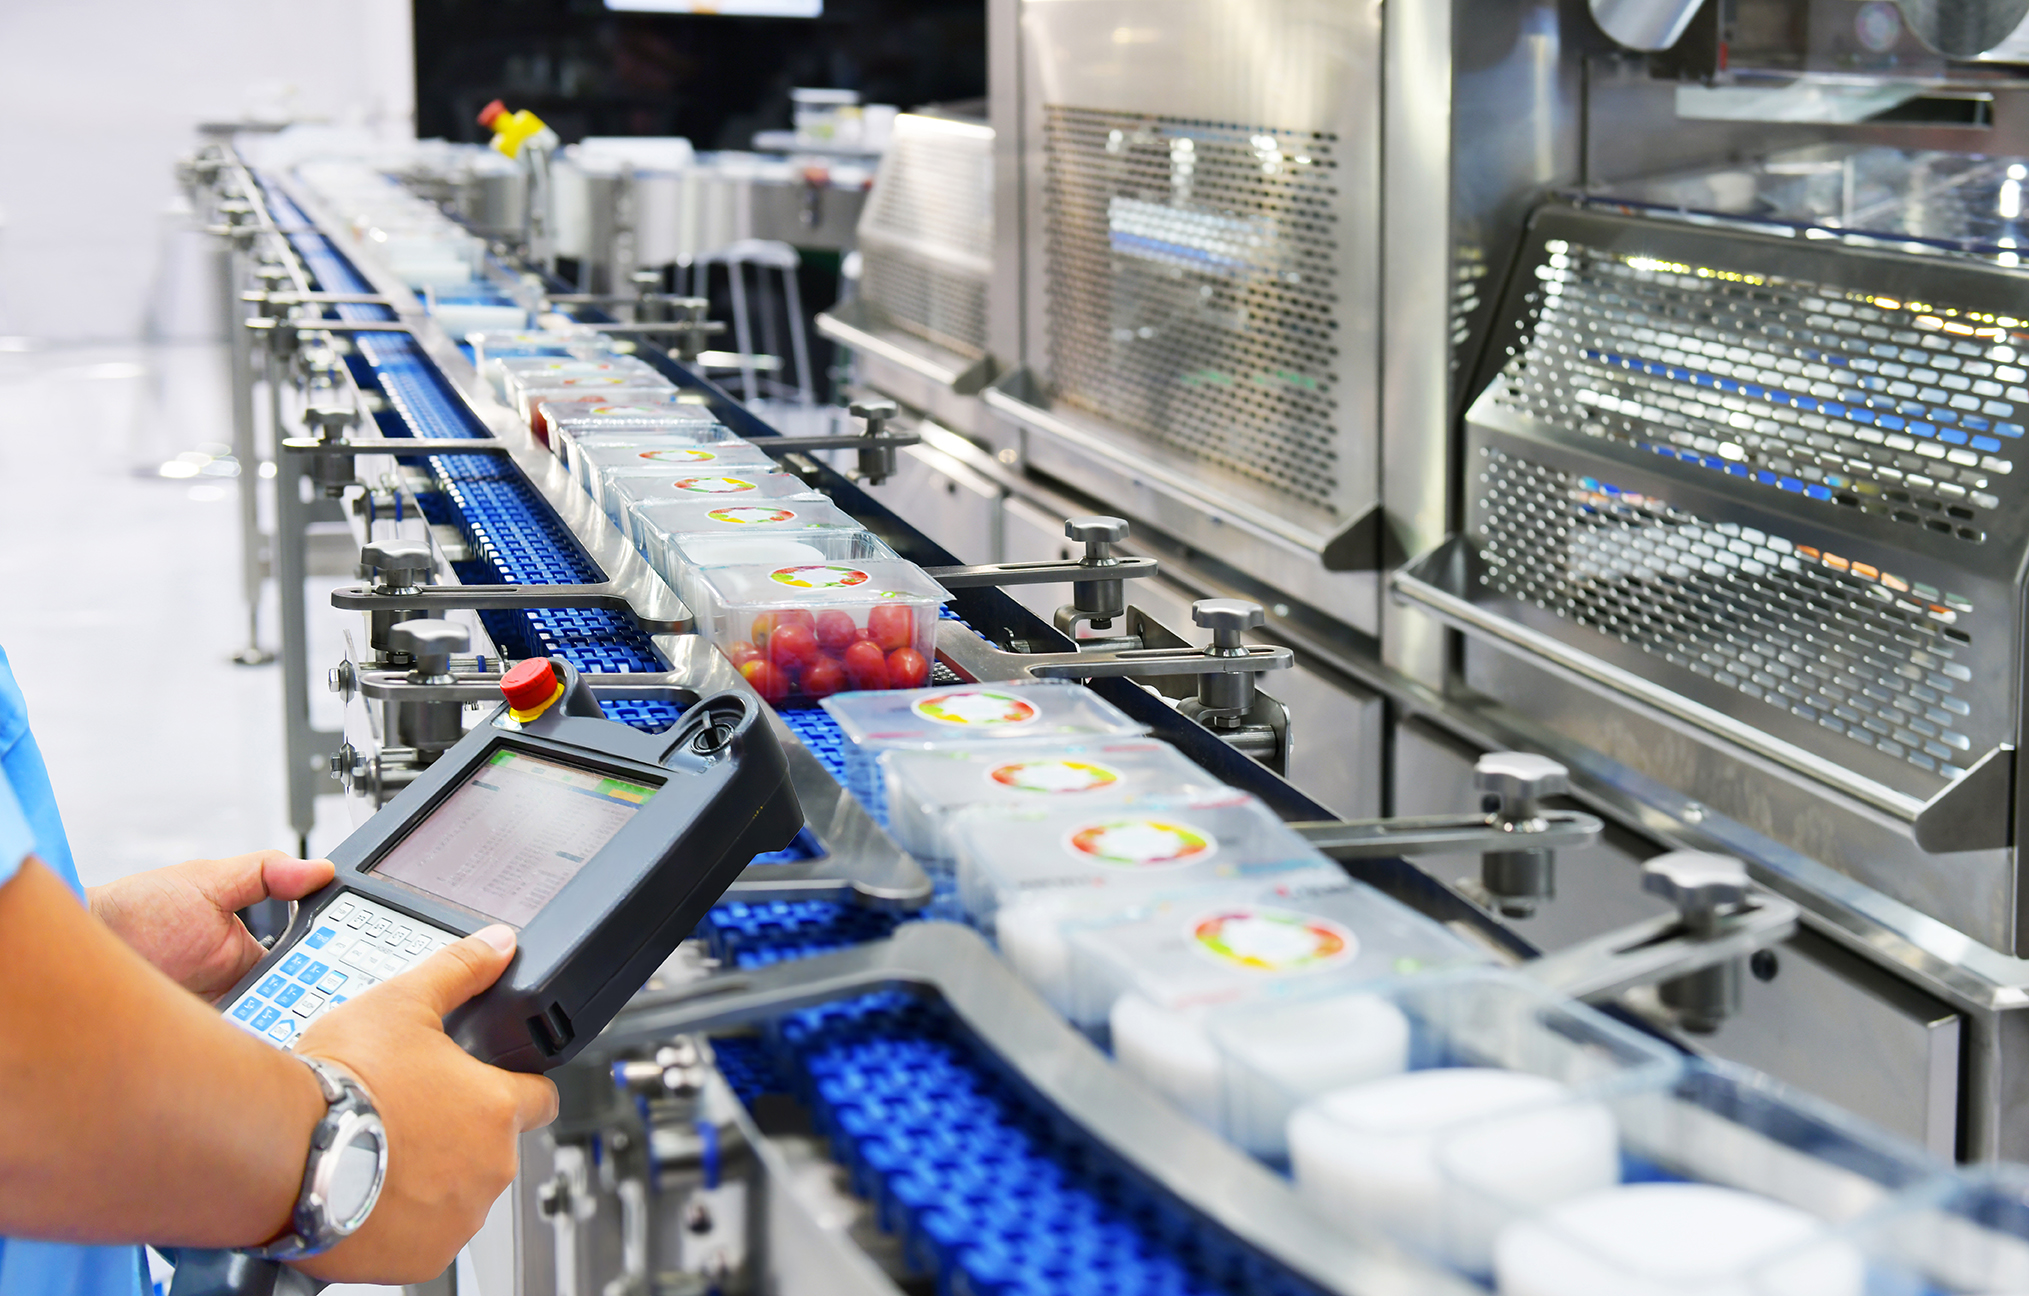 Australian food and beverage manufacturing firms have just four weeks to apply for grants under Round 1 of the federal government's Modern Manufacturing Initiative to help them scale up, employ and export. So act fast!